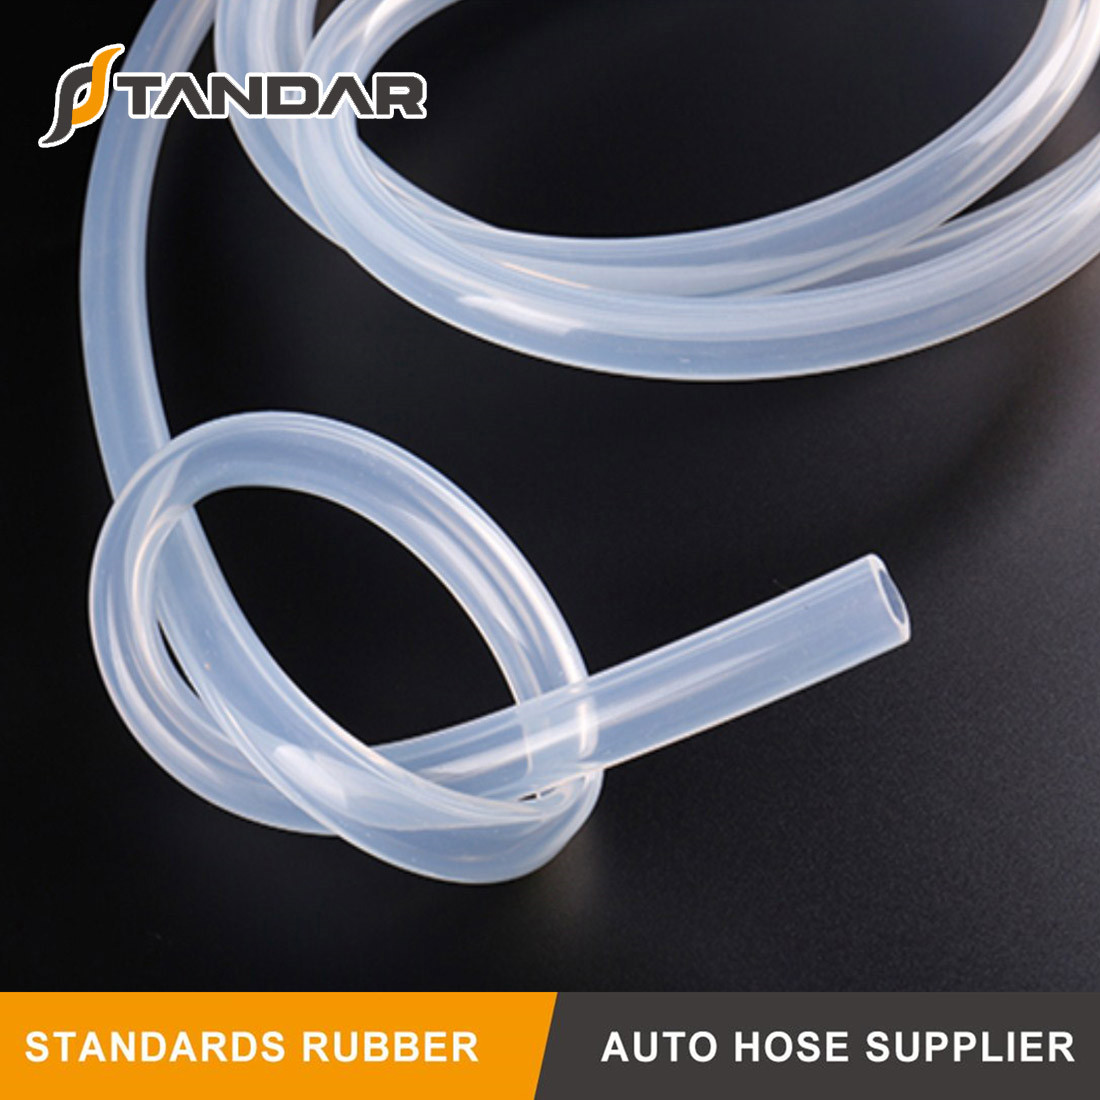 What is the relationship between Standads's medical grade silicone tubing and GMP?